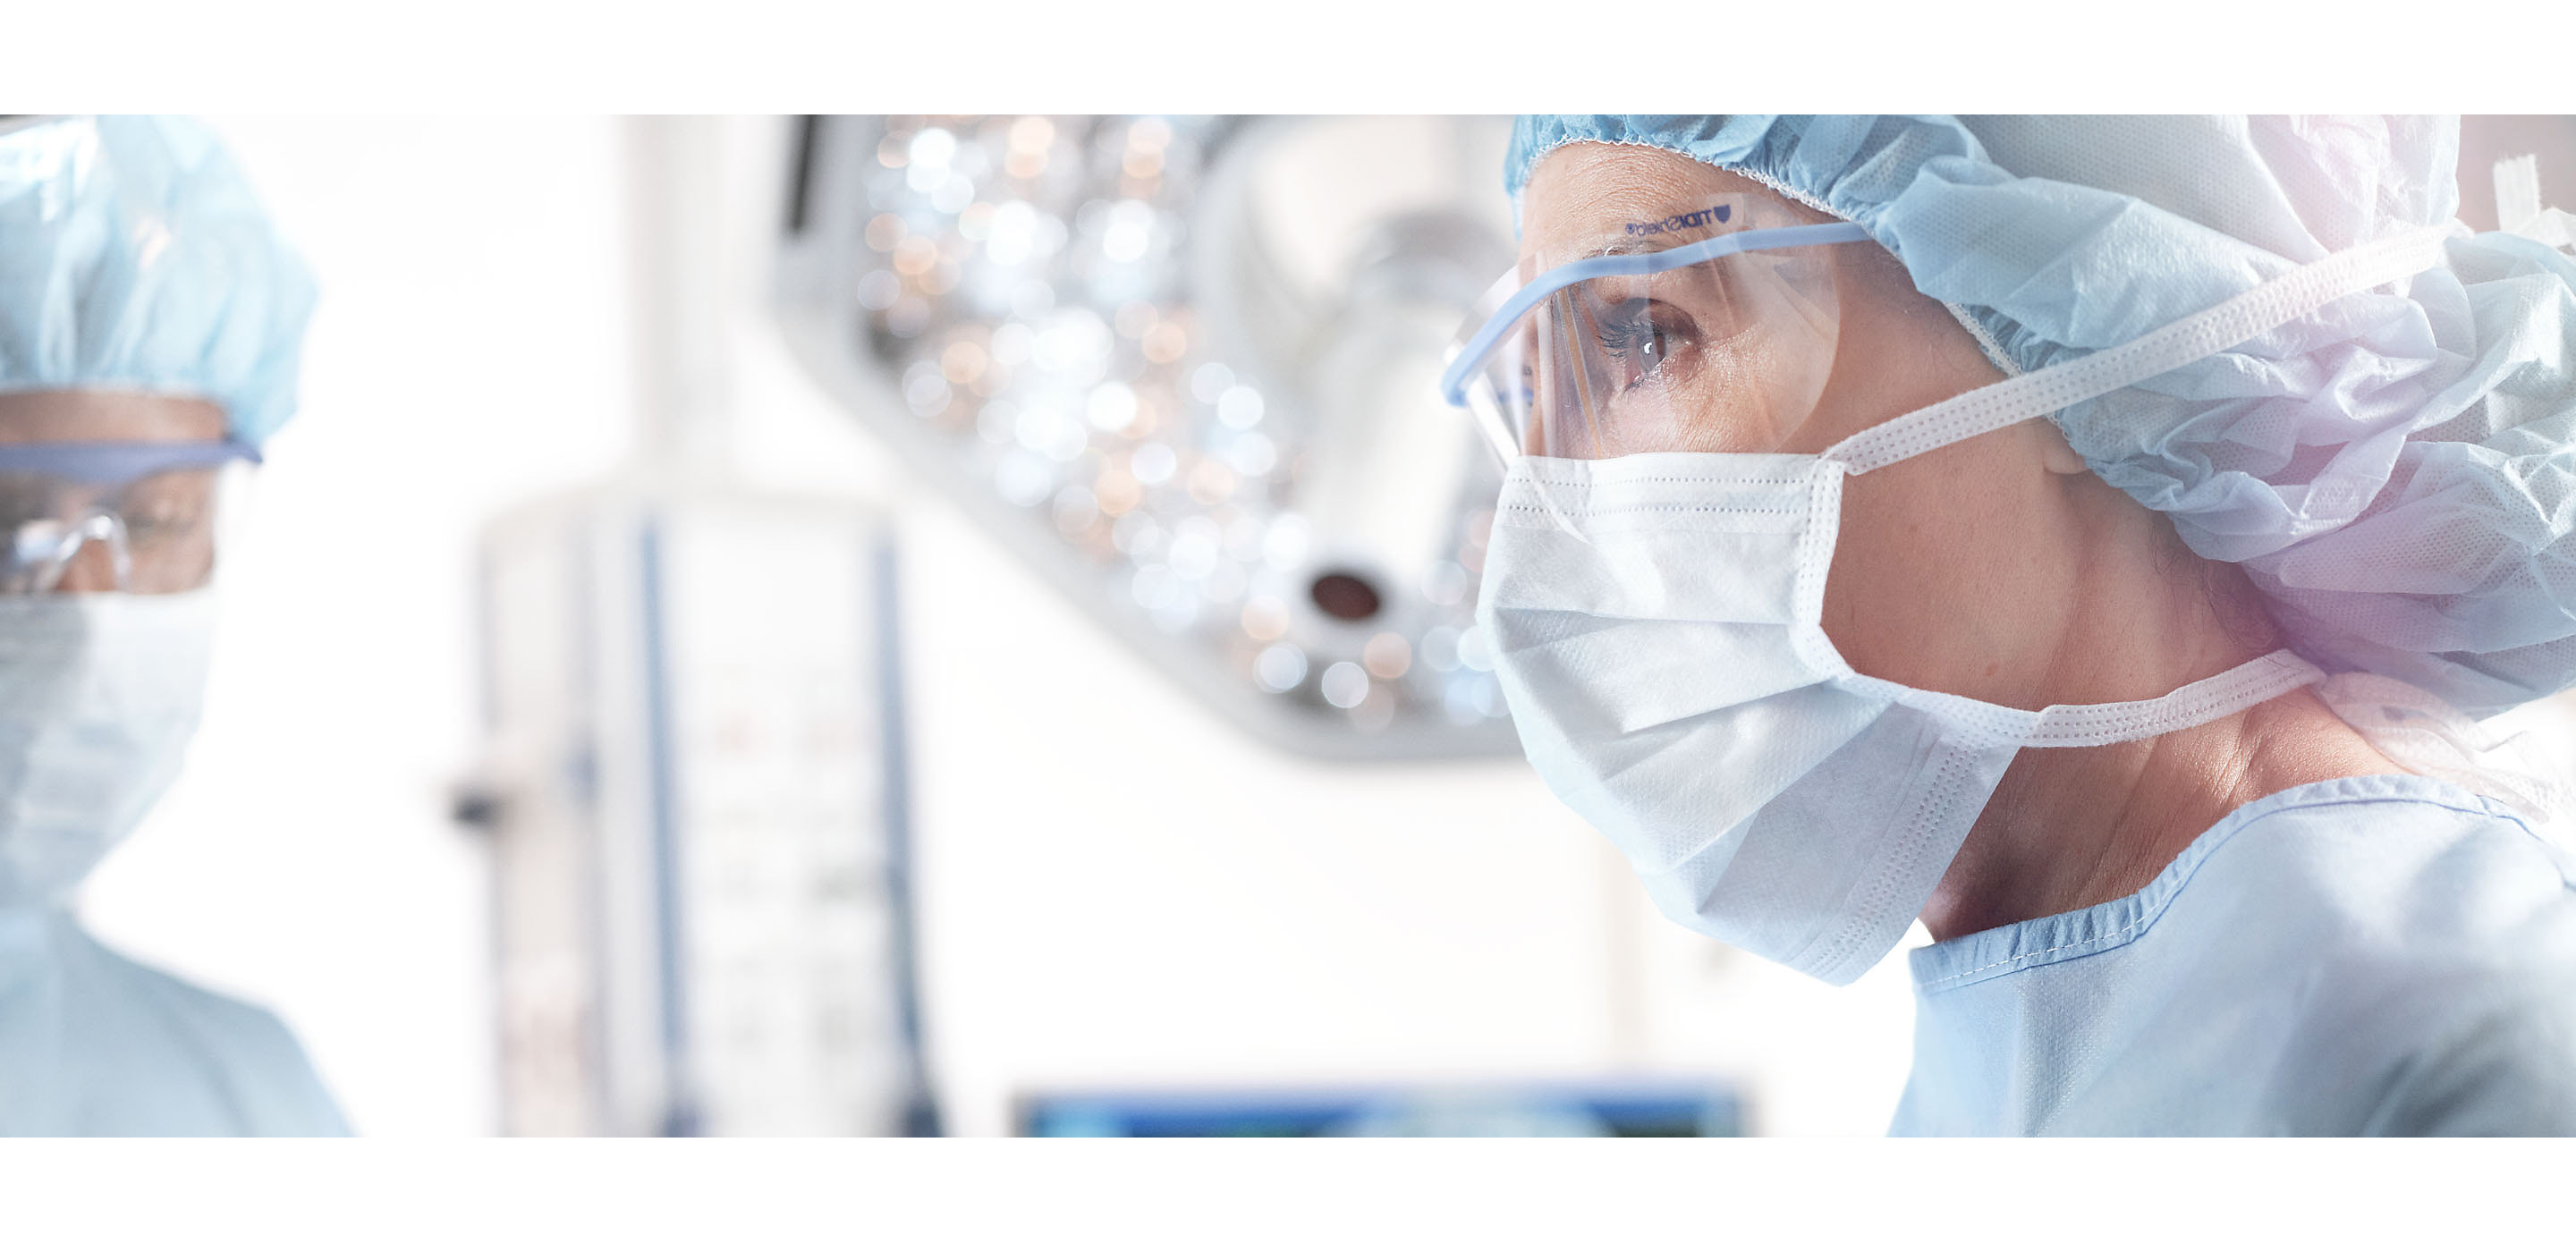 A surgical team member looks forward confidently